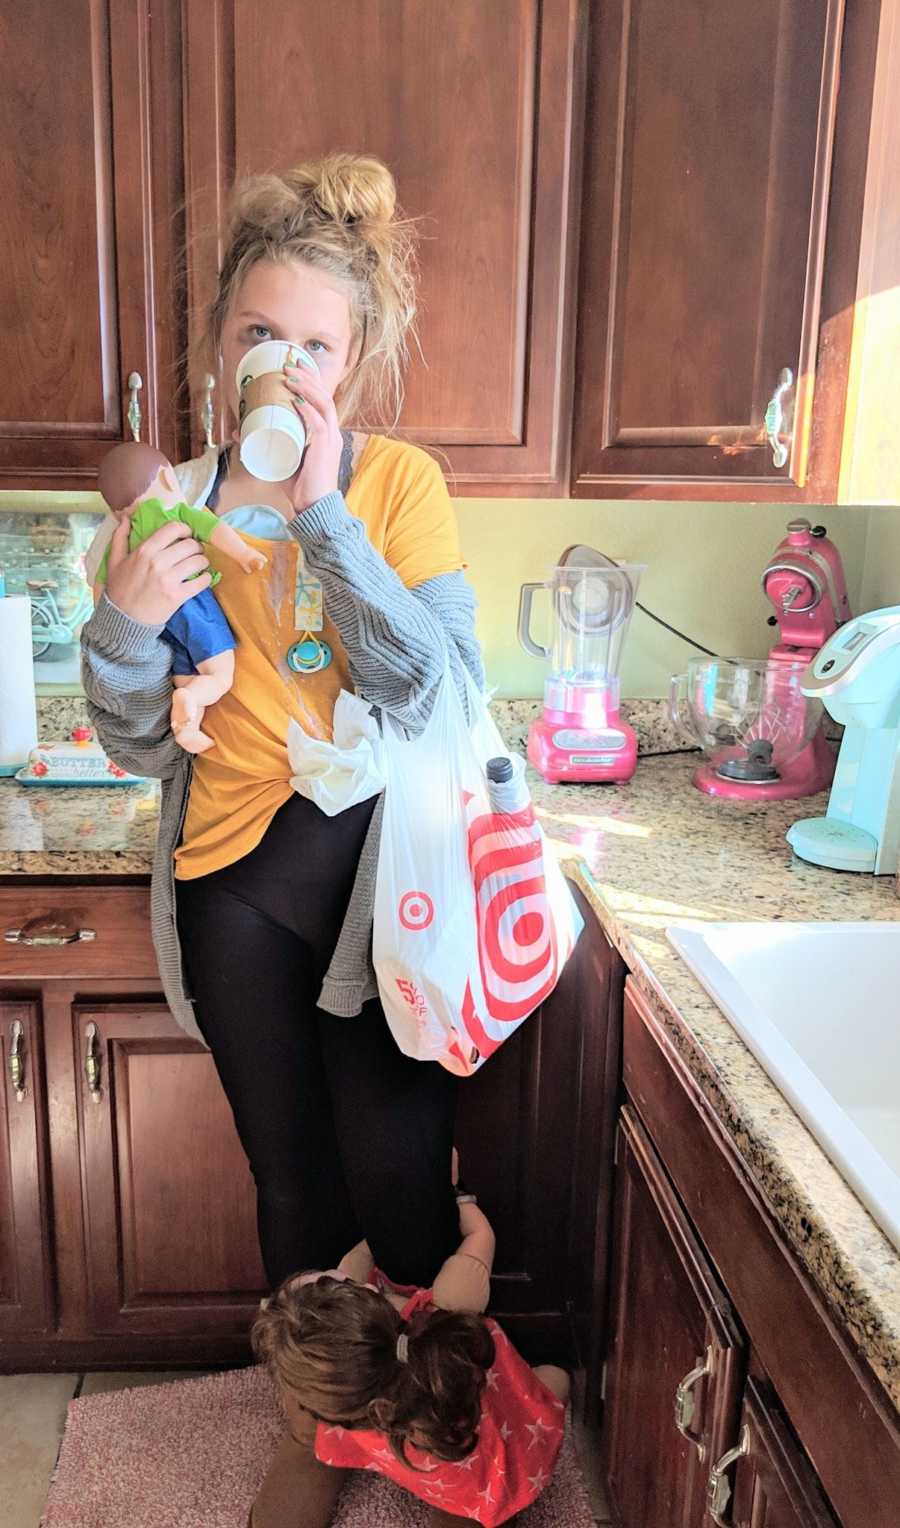 Teen dressed as "tired mom" stands in kitchen drinking out of Starbucks cup